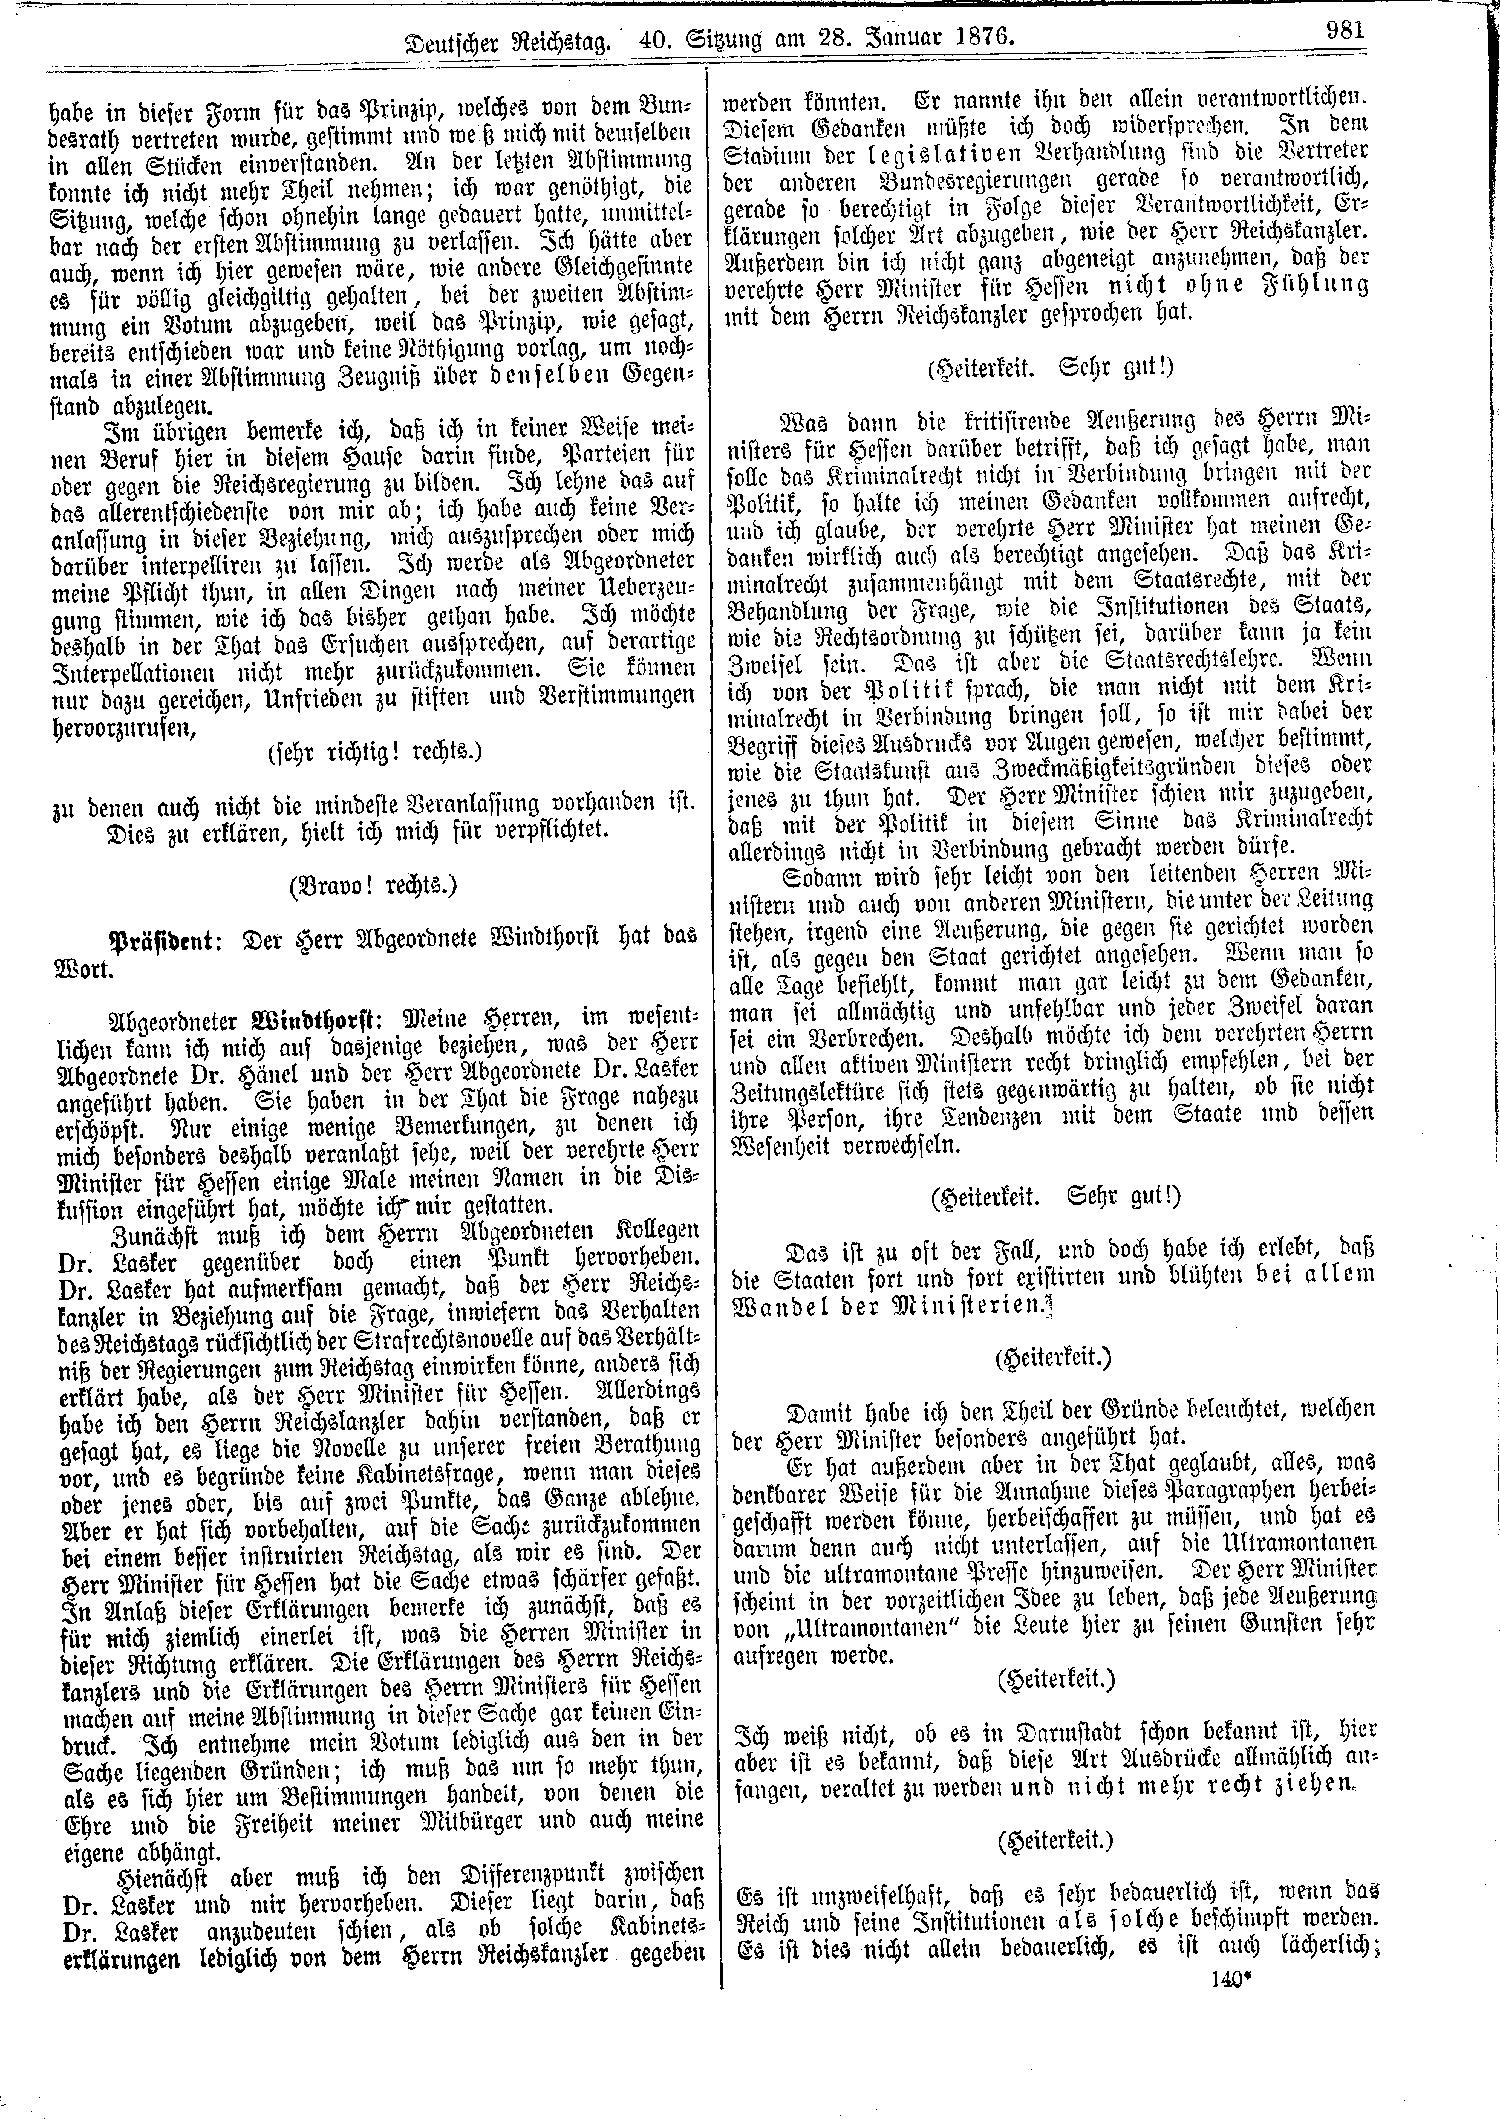 Scan of page 981